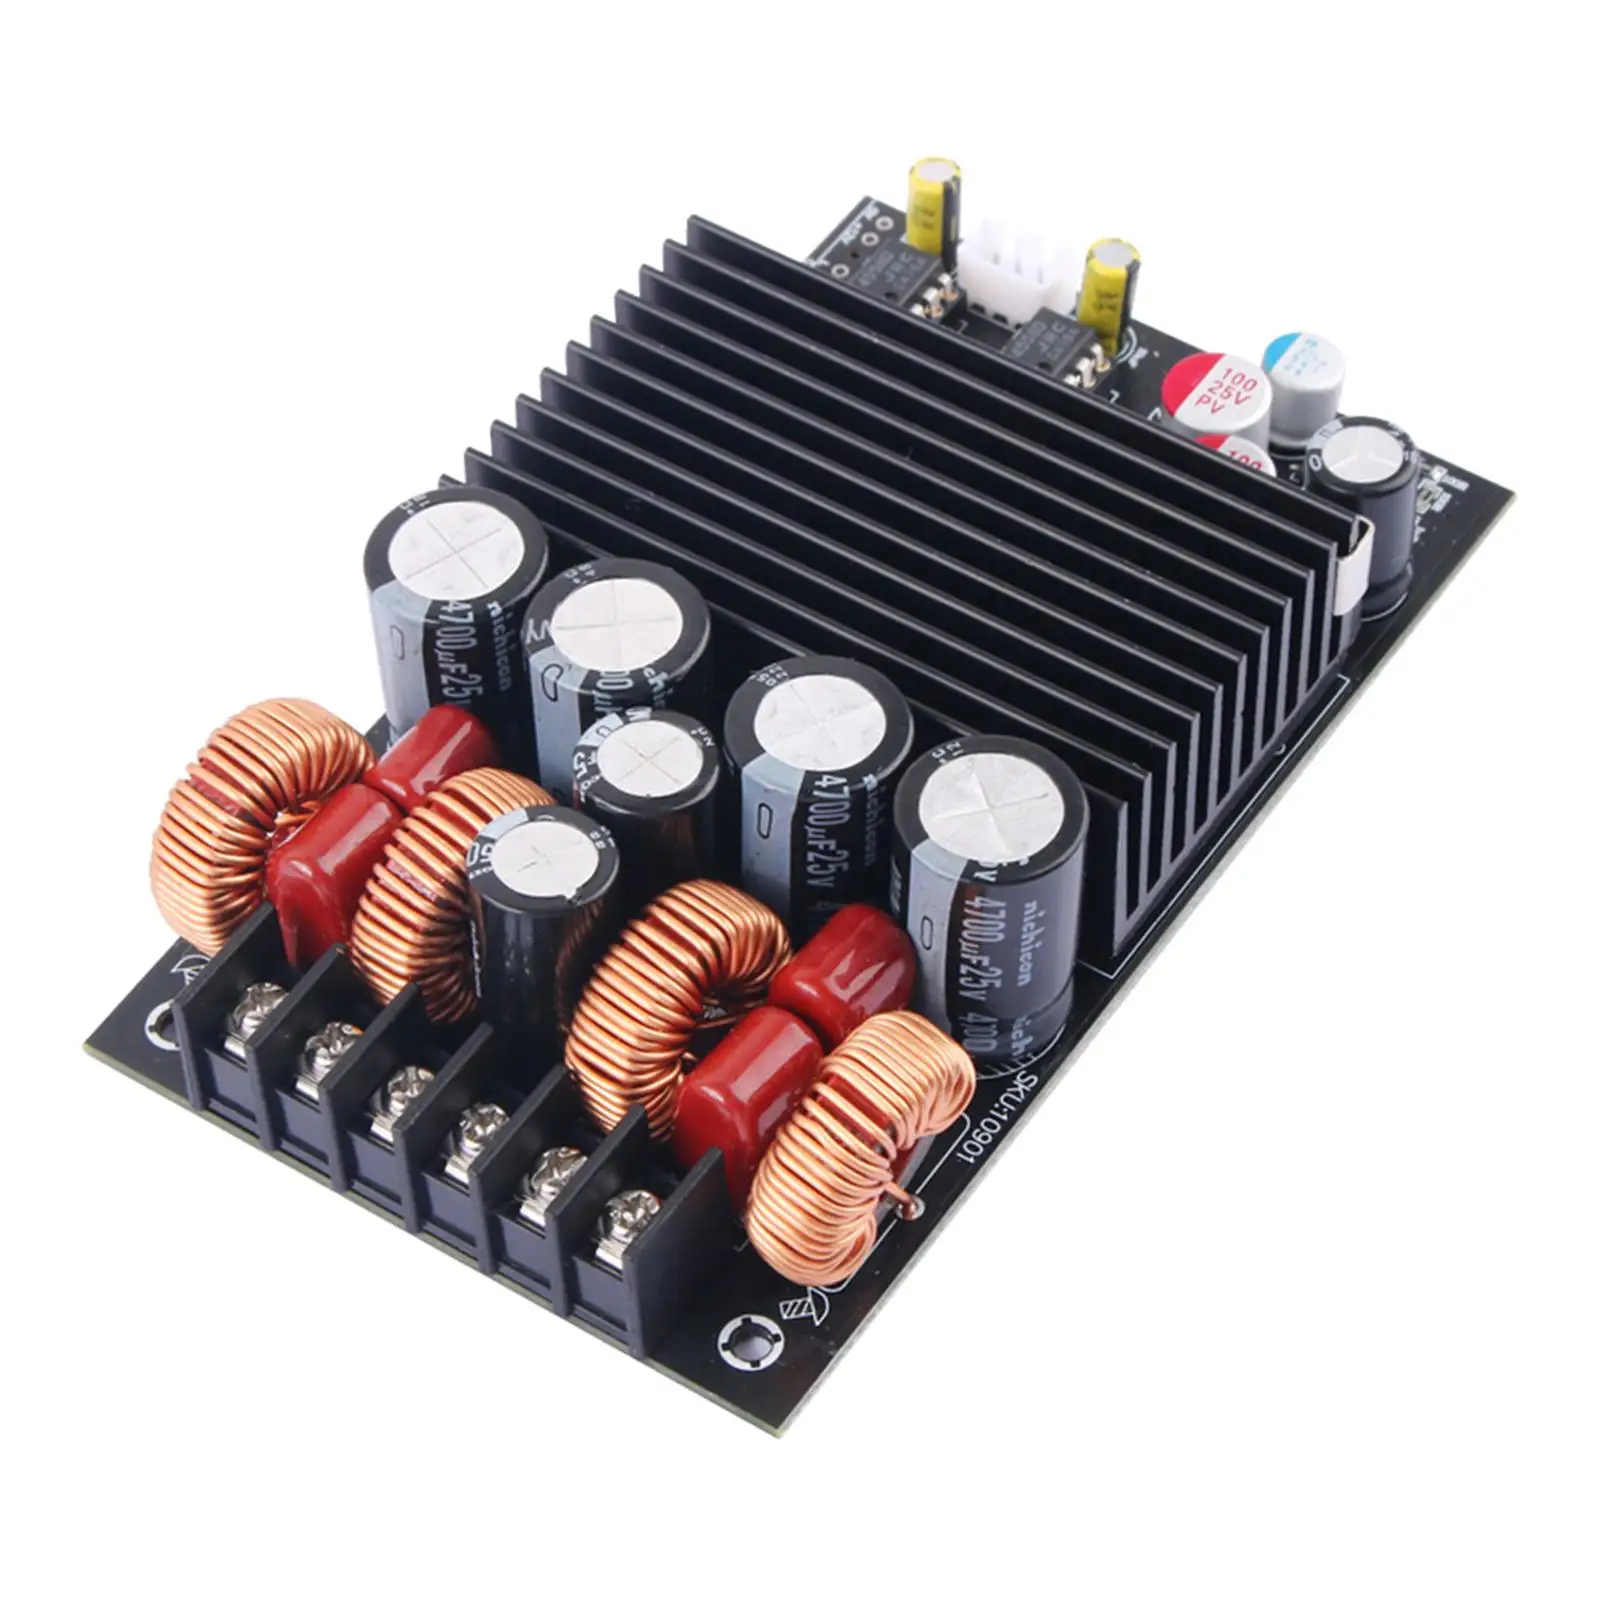 TPA3255 Car Amplifier Board Versatile Easy to Install High Stability Powerful Professional 600W Dual Channel Car Amp Board